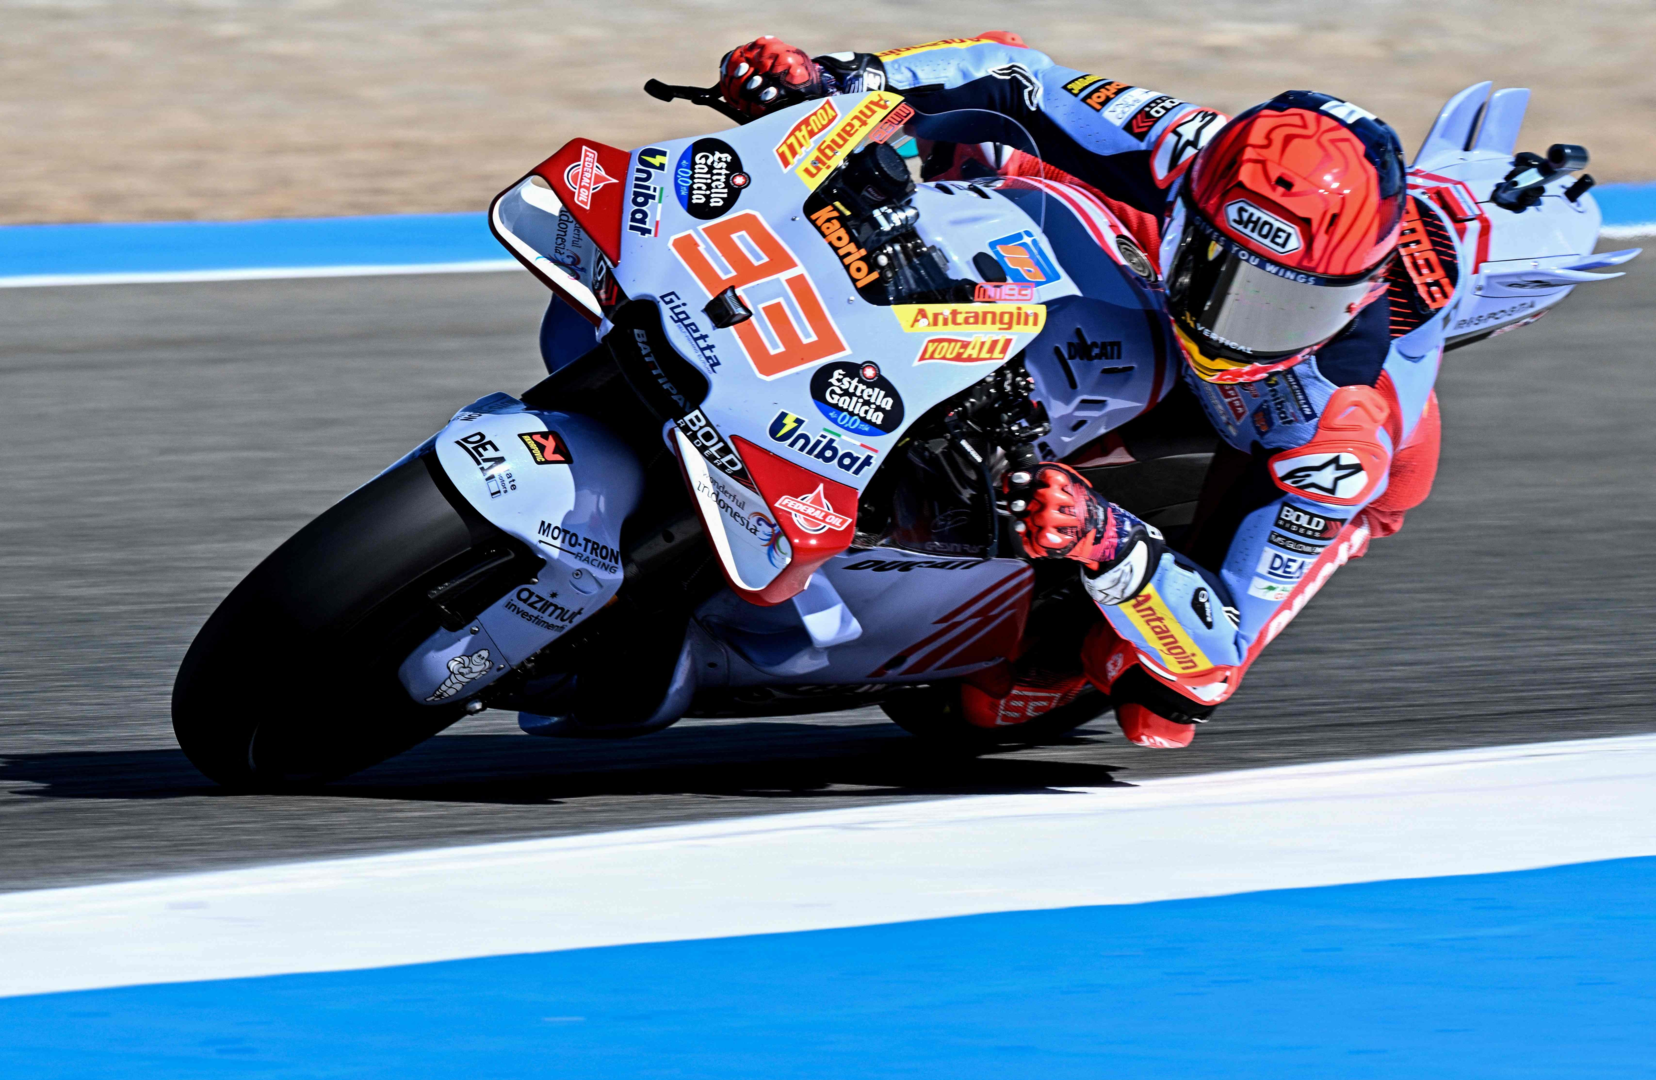 Marquez Leads the Pack in Spain's MotoGP Race